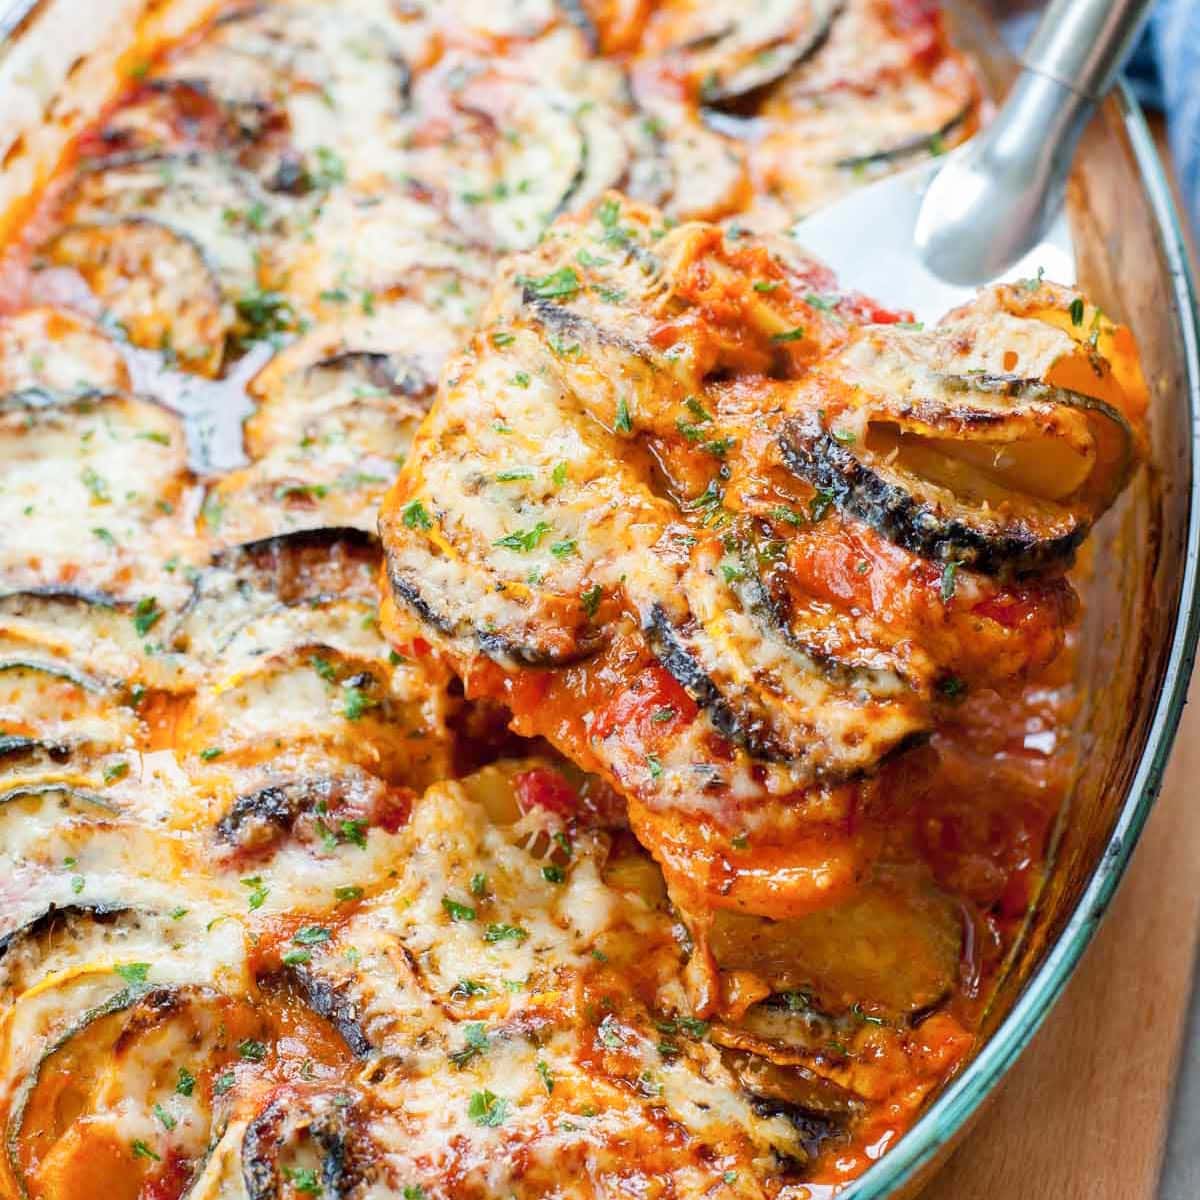 Baked ratatouille in a baking dish.